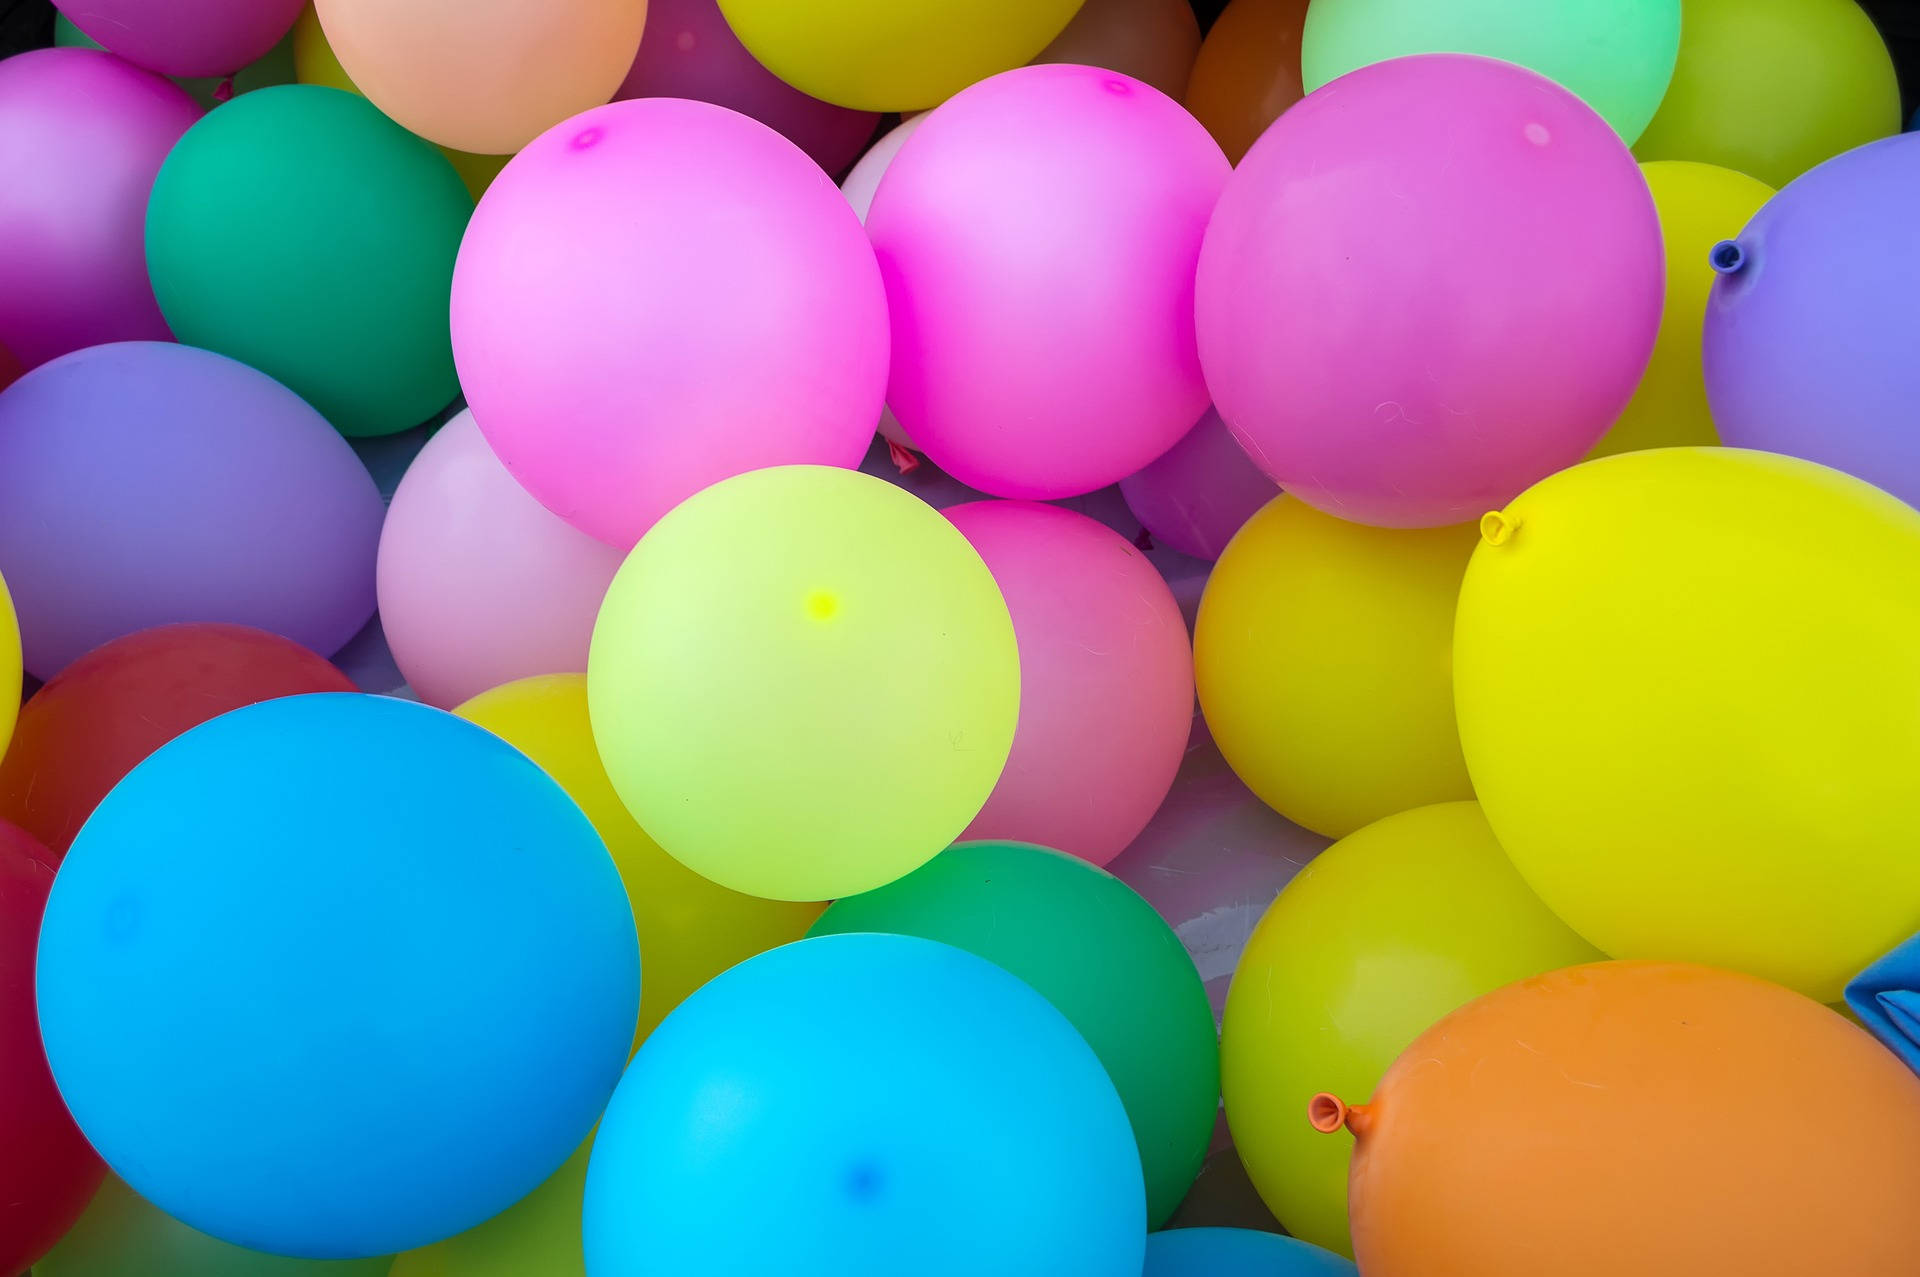 Multicolored Balloons For Colorful Background Wallpaper